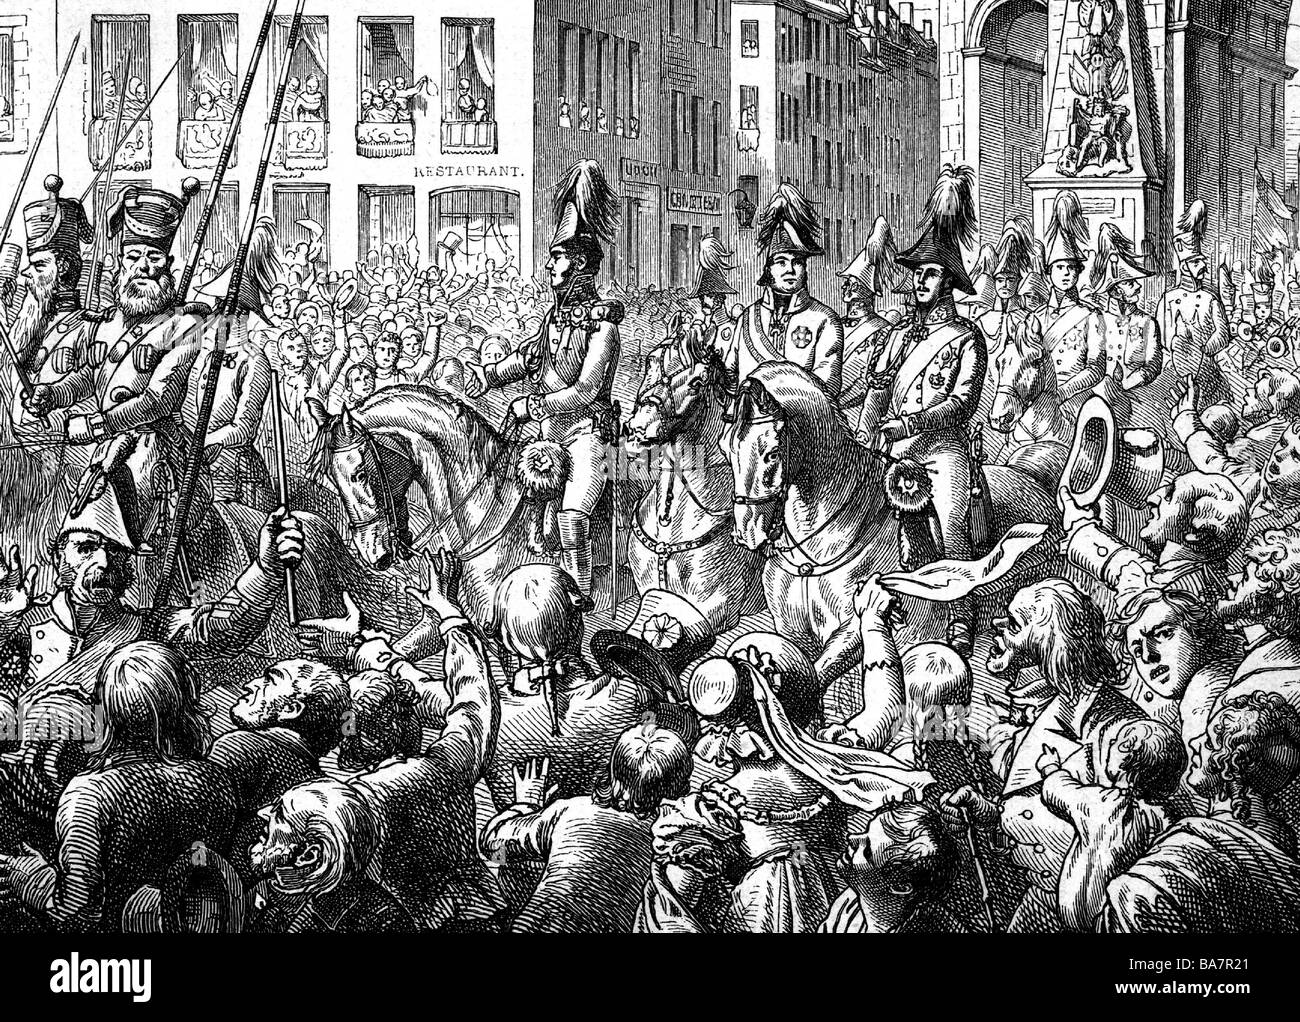 events, War of the Sixth Coalition 1812 - 1814, the Allied entering Paris 31.3.1814, wood engraving after Wilhelm von Camphausen, 19th century, Tsar Alexander I of Russia, Emperor Francis Franz I of Austria, King Frederick William III of Prussia, Napoleonic Wars, France, cossacks, soldiers, cheering, crowd, people, historic, historical, Stock Photo